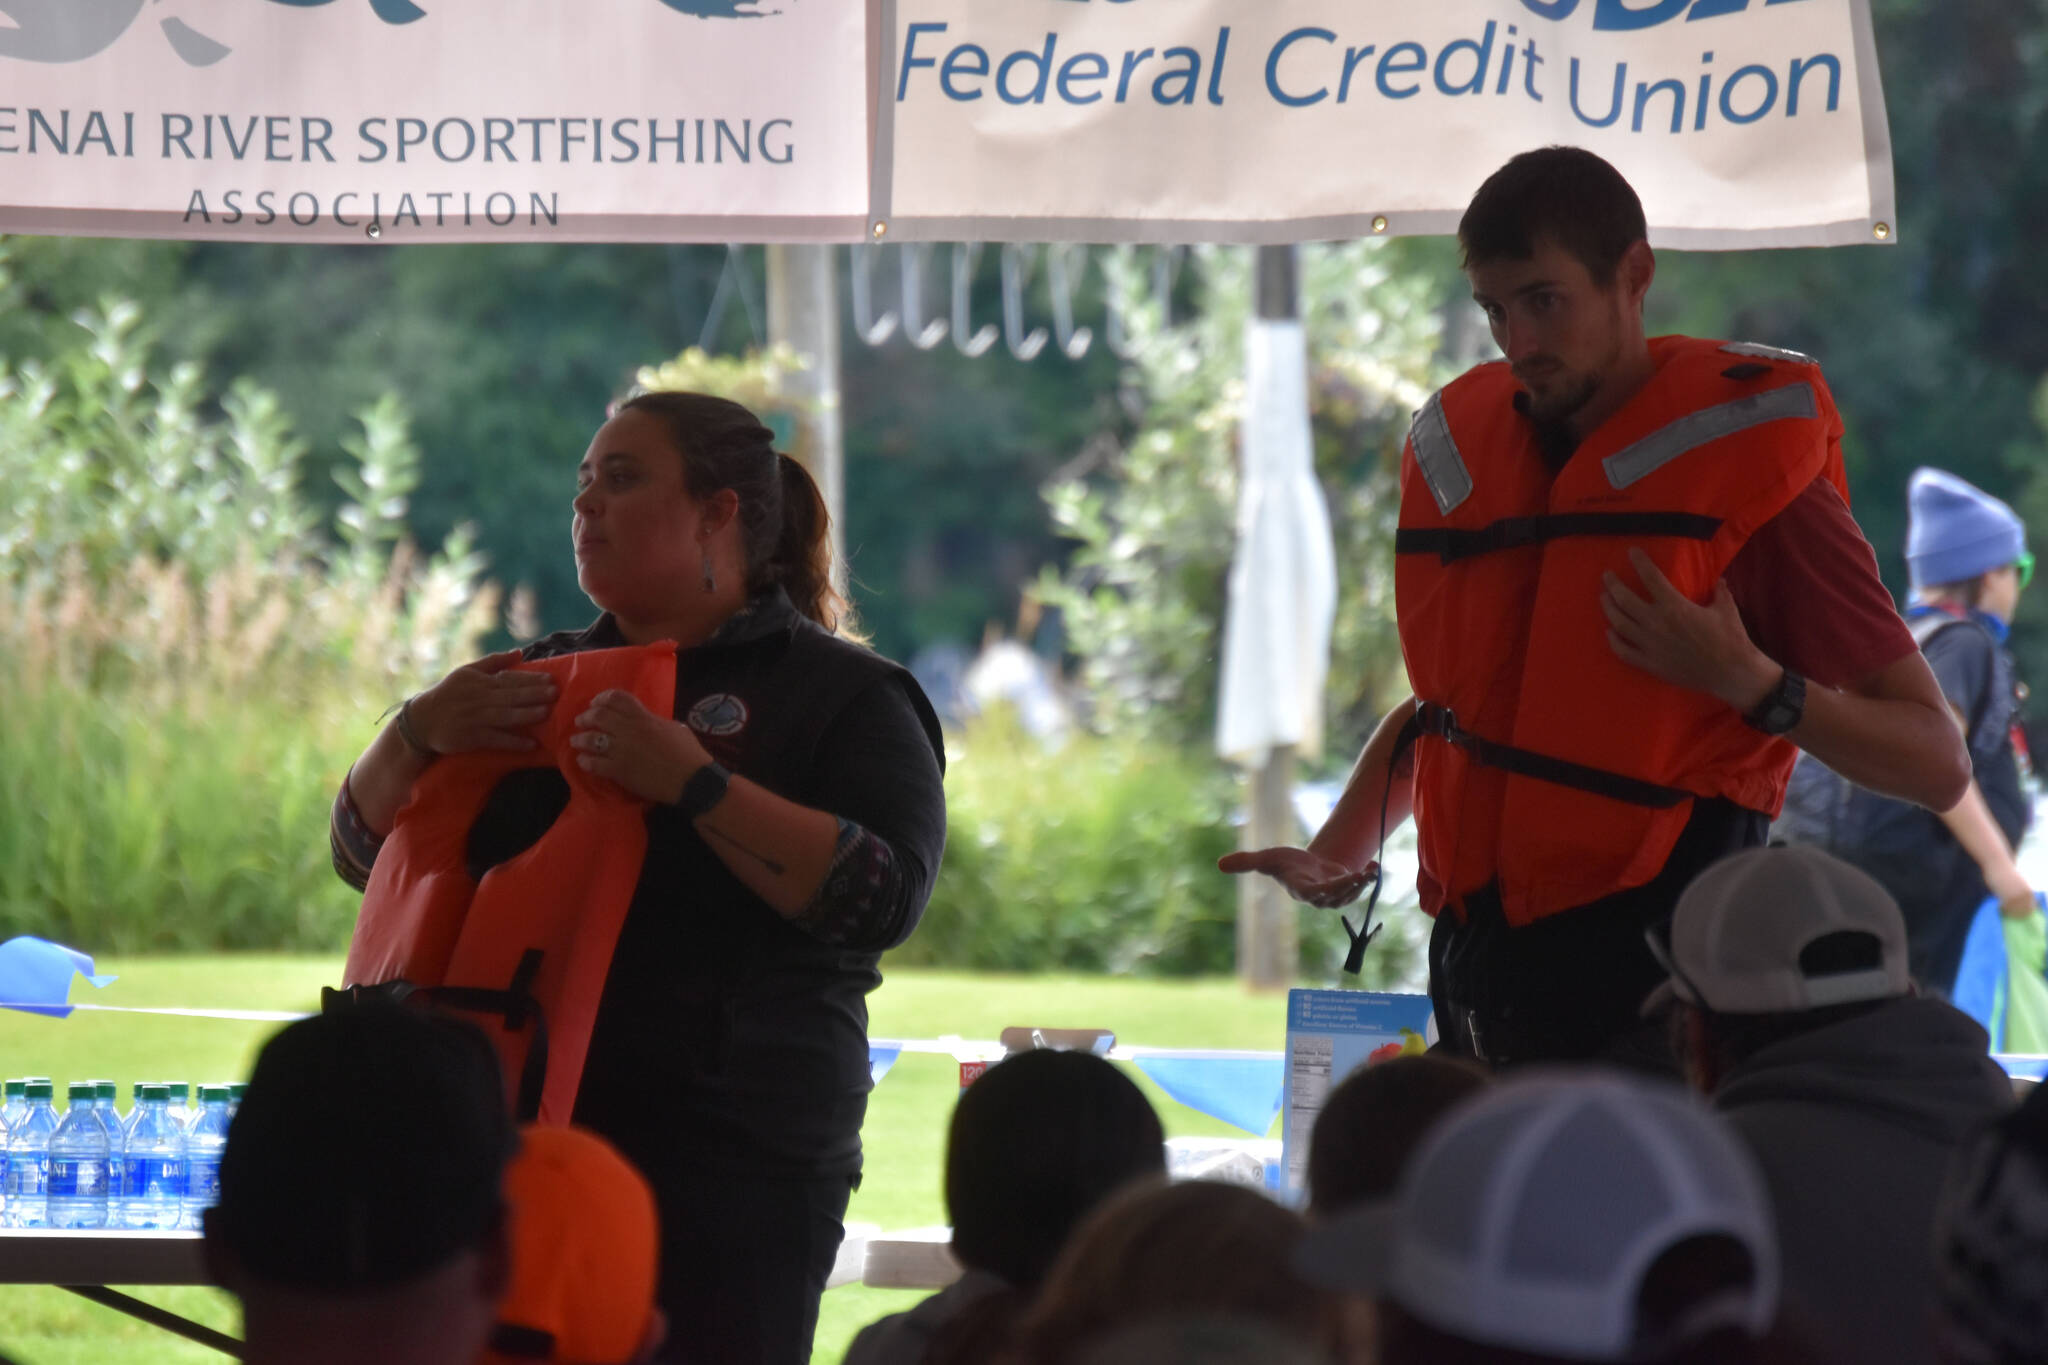 Representatives of the Alaska Office of Boating Safety deliver a presentation on water safety in cold Alaska rivers during the Kenai River Junior Classic in Soldotna, Alaska, on Aug. 10, 2022. (Jake Dye/Peninsula Clarion)